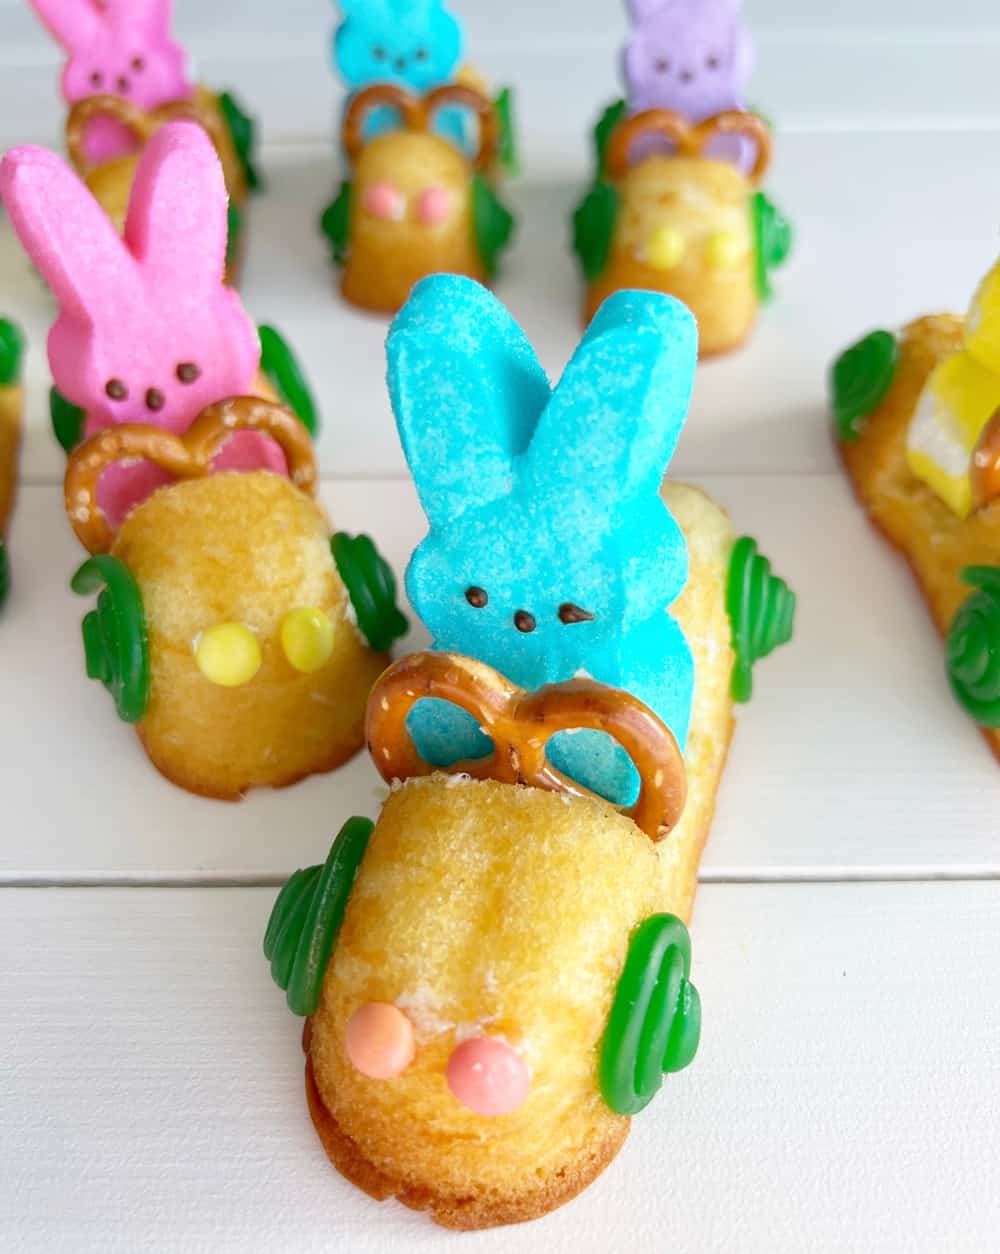 How To Make This Cute Easter Peeps Race Car Treat